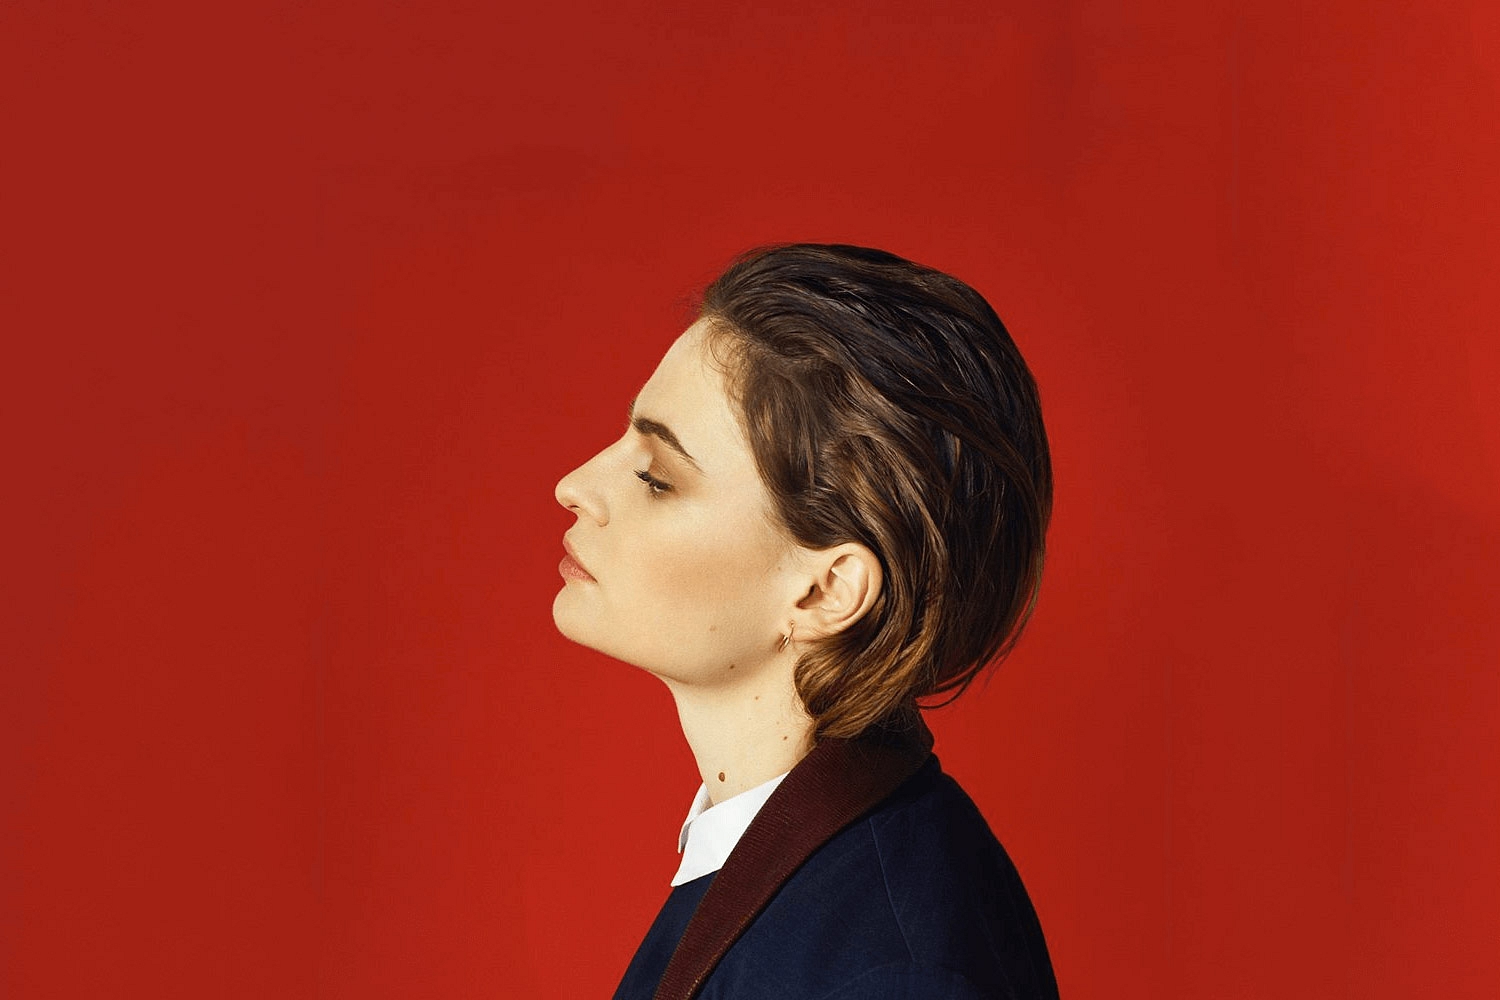 Christine and The Queens: iT Follows